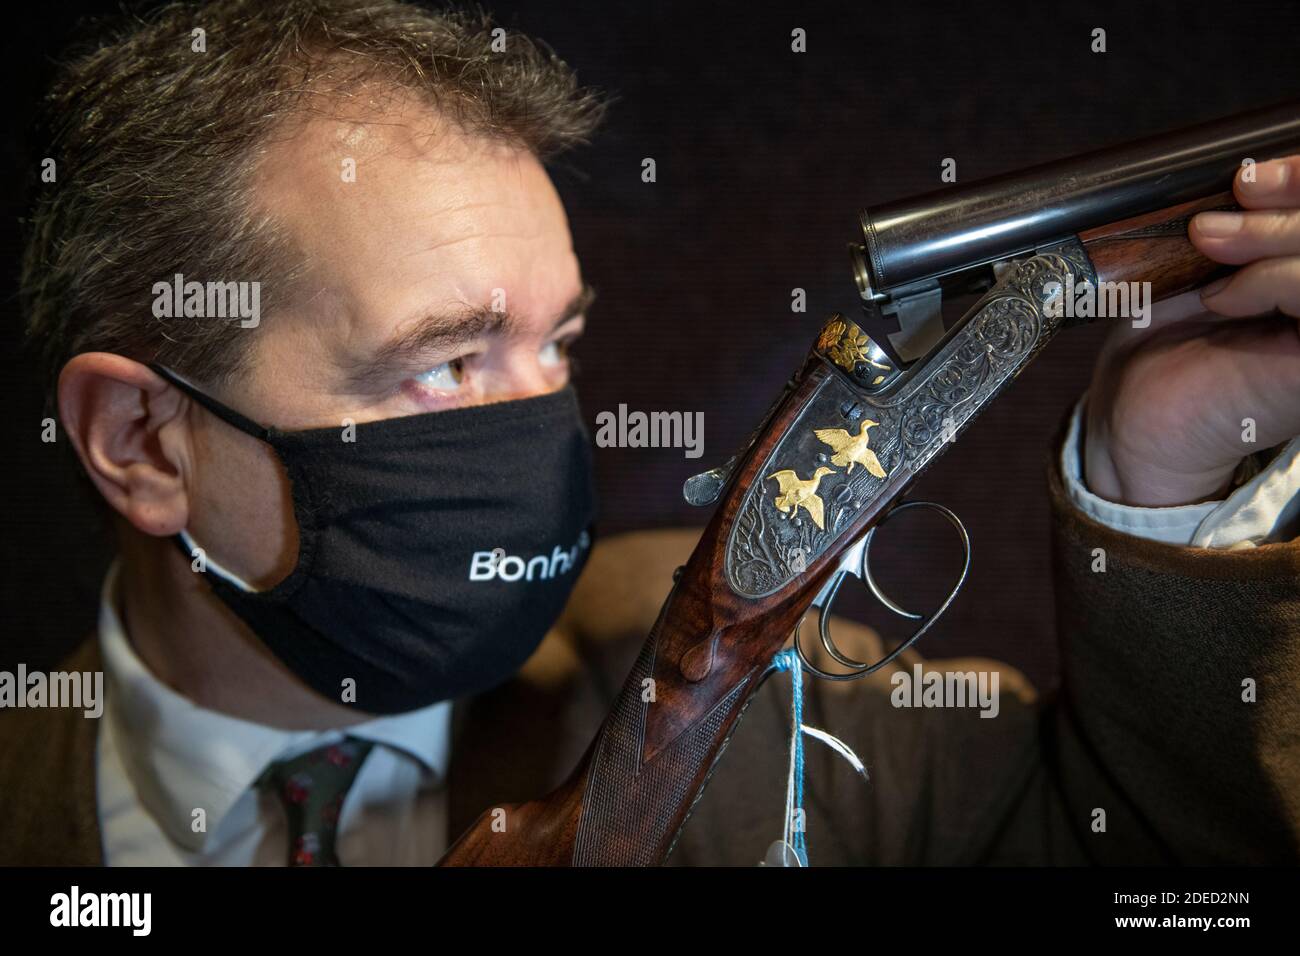 Knightsbridge, London, UK. 30 November 2020. Preview of Bonhams' Antique Arms, Modern Sporting Guns & Exceptional Firearms sale in London. The sale will be held on 3 December. Image: Bonhams staff looks along the bore of one of a pair of Ken Hunt decorated 12-bore self-opening sidelock ejector guns by J. Purdey & Sons, completed in 1968. Hunt was born in 1935 and at the age of 15 became an engraving apprentice with Purdey's under the famous Harry Kell. In 1963 he went into business in his own right, working until his retirement in 2011. Estimate: £35,000-55,000. Credit: Malcolm Park/Alamy Live Stock Photo